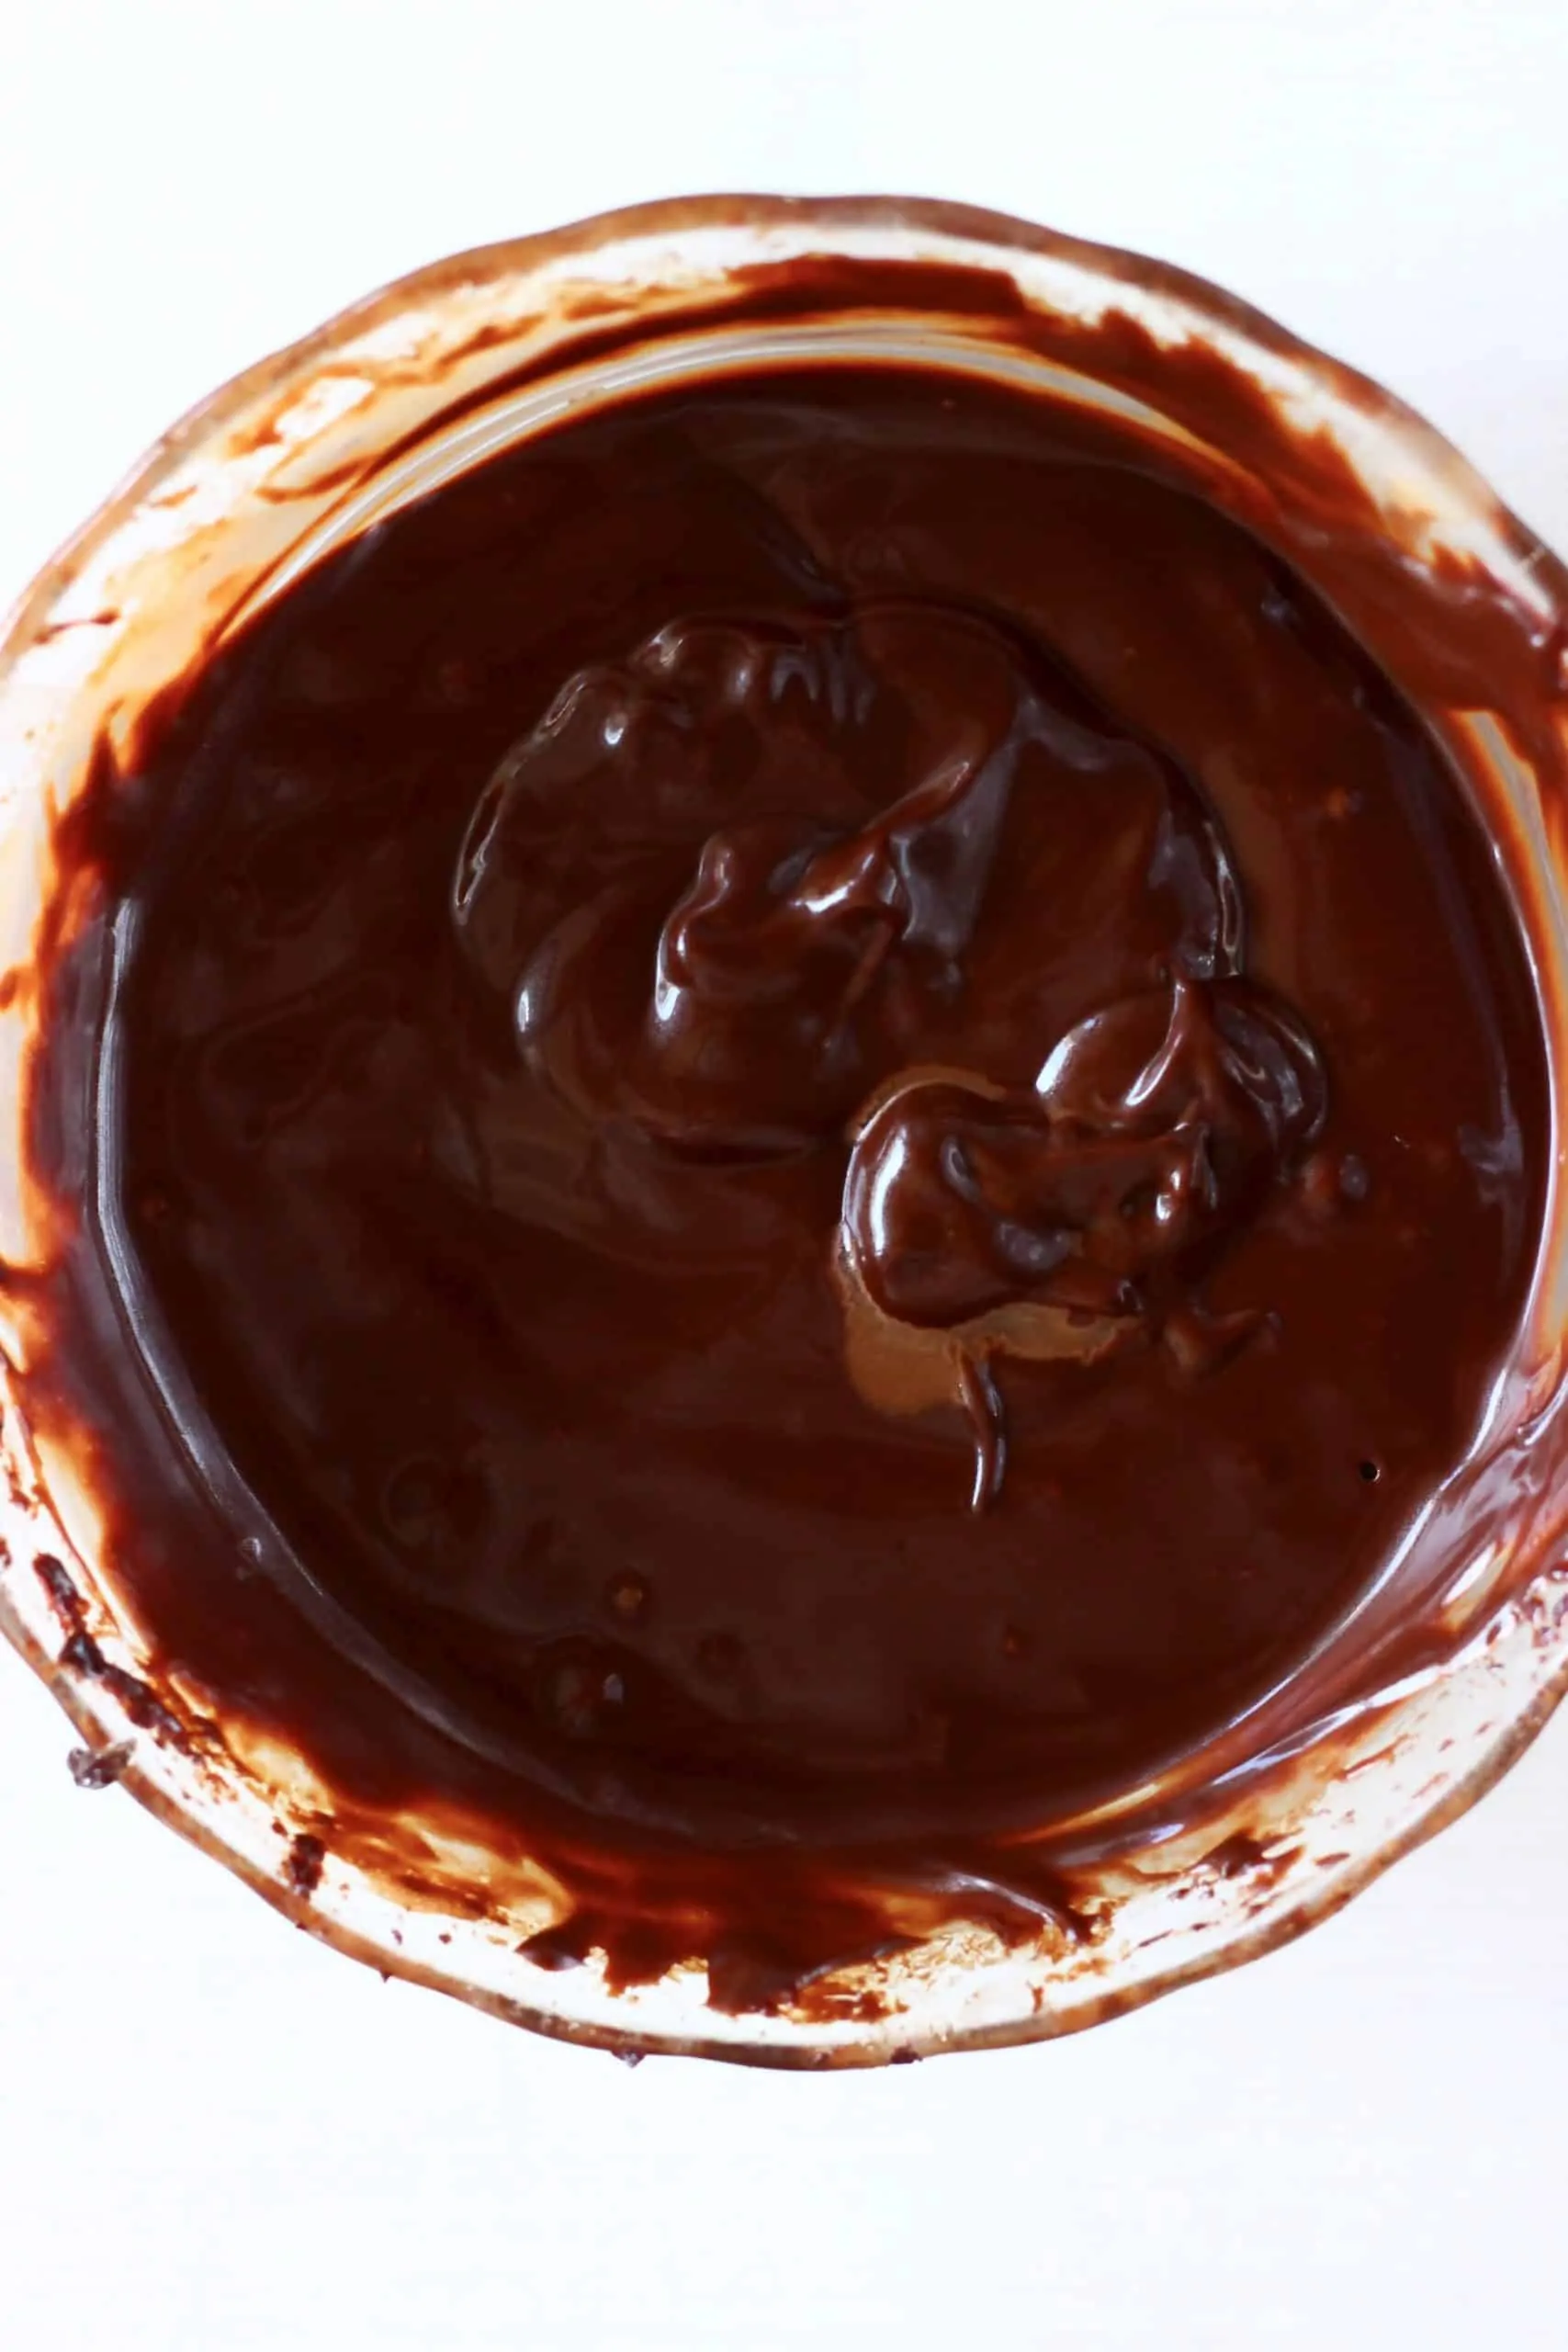 Melted dark chocolate in a glass bowl